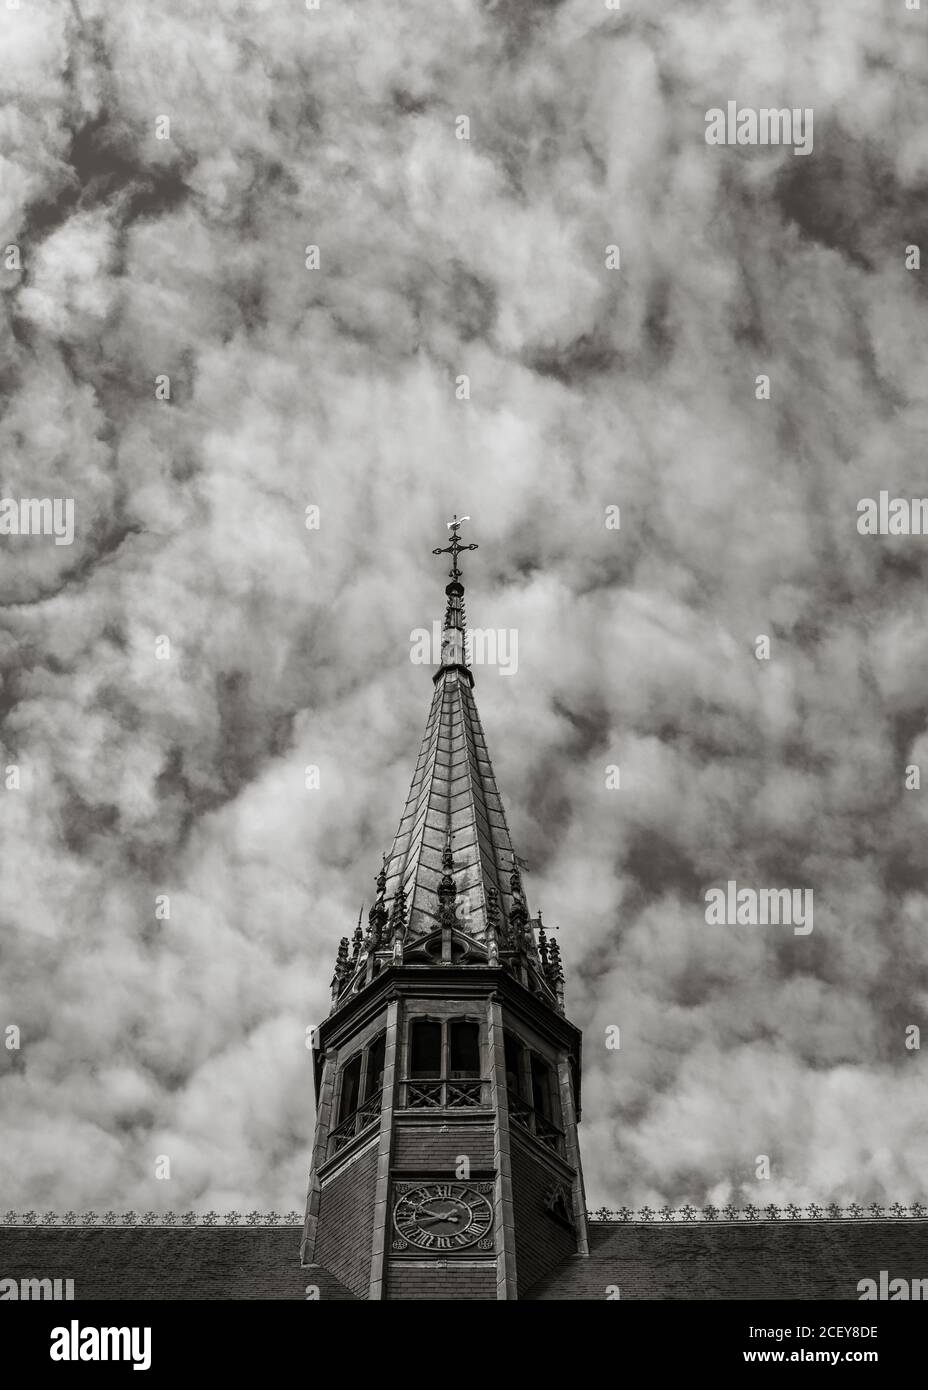 Roof details of the Hospices de Beaune, France. Black and white image Stock Photo